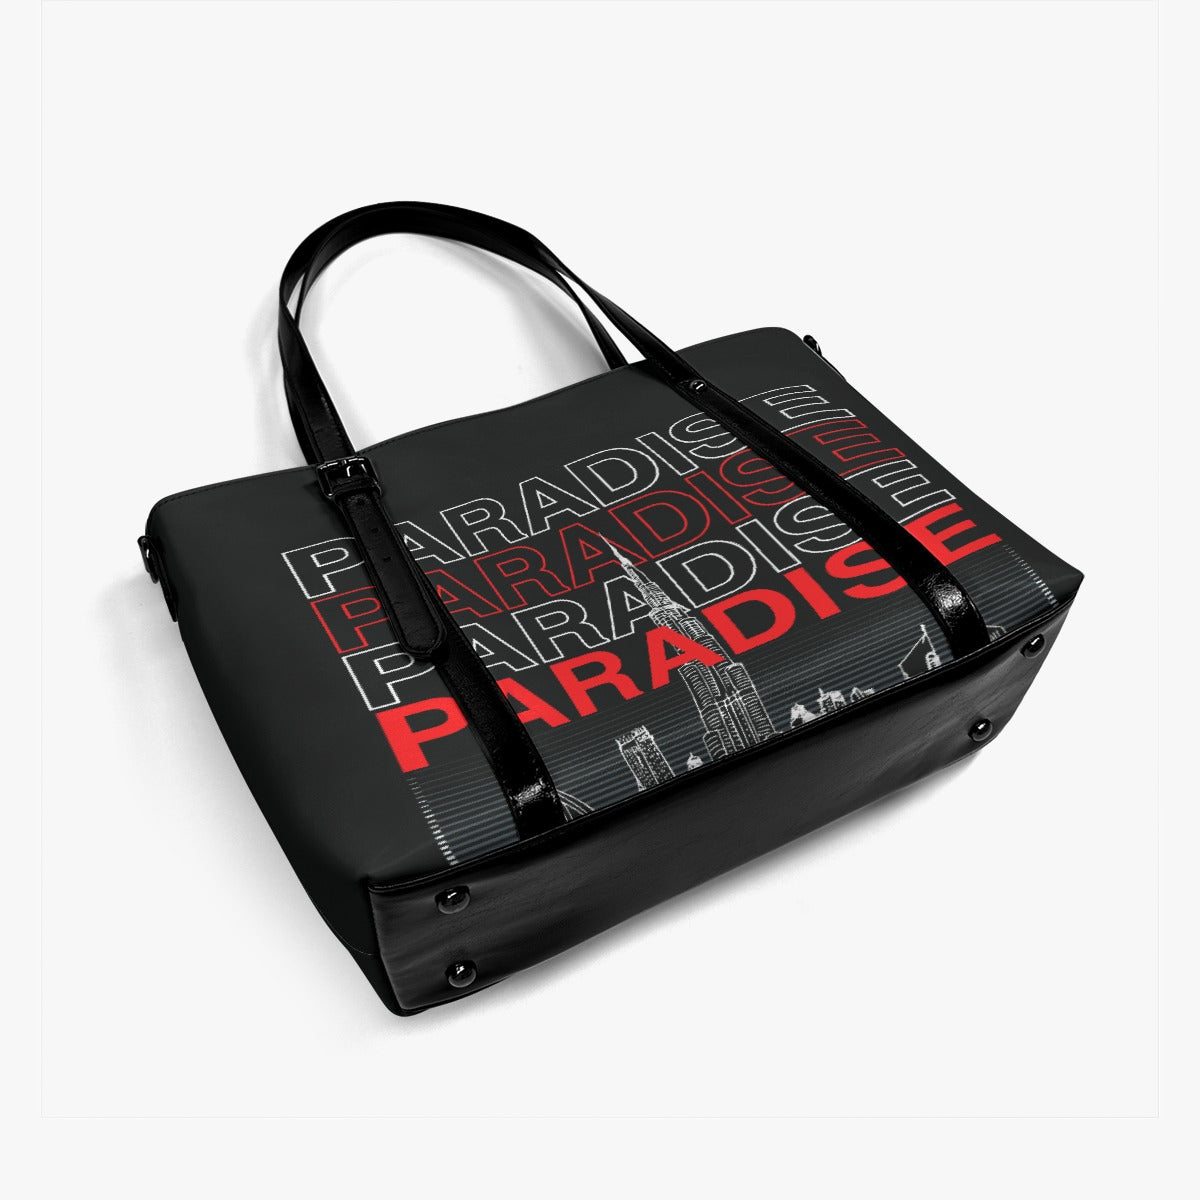 Black & Red Paradise Women's Tote Bag With Adjustable Handle, Large Travel Bag, Duffel